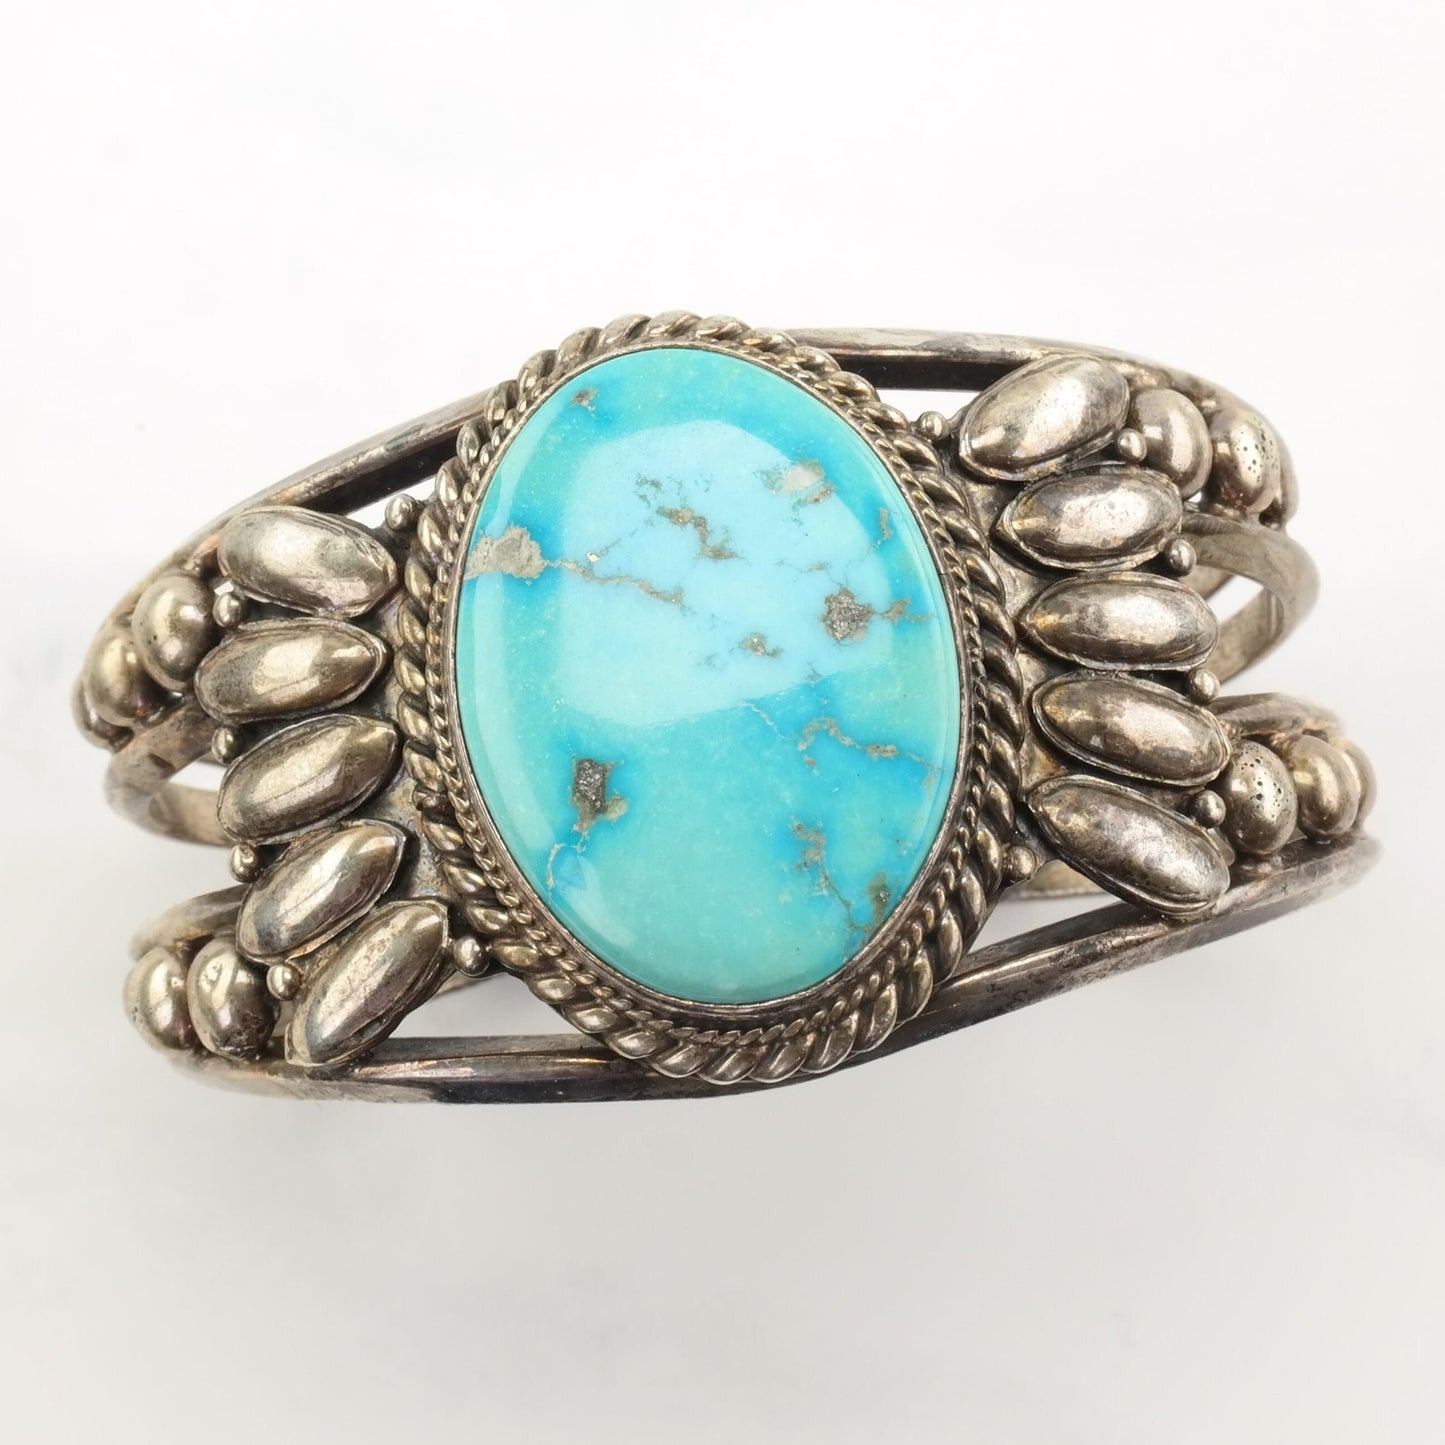 Native American Sterling Silver Turquoise Oval Cuff Bracelet